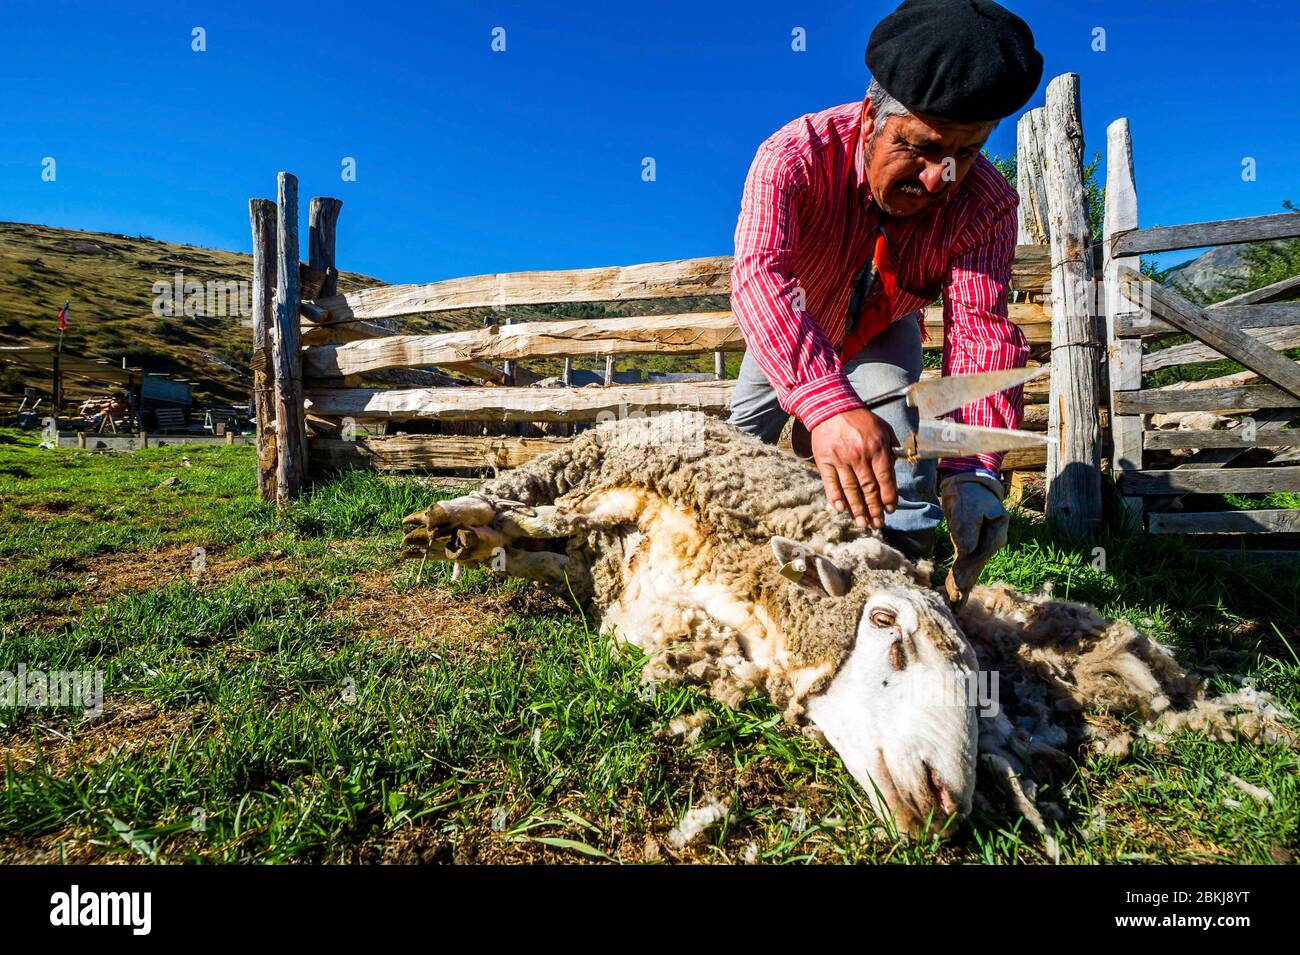 Chile, Patagonia, Aysen, Coyhaique, estancia Los Leones, Don Rolondo still shears his sheep in the traditional way, with a hand scissor Stock Photo